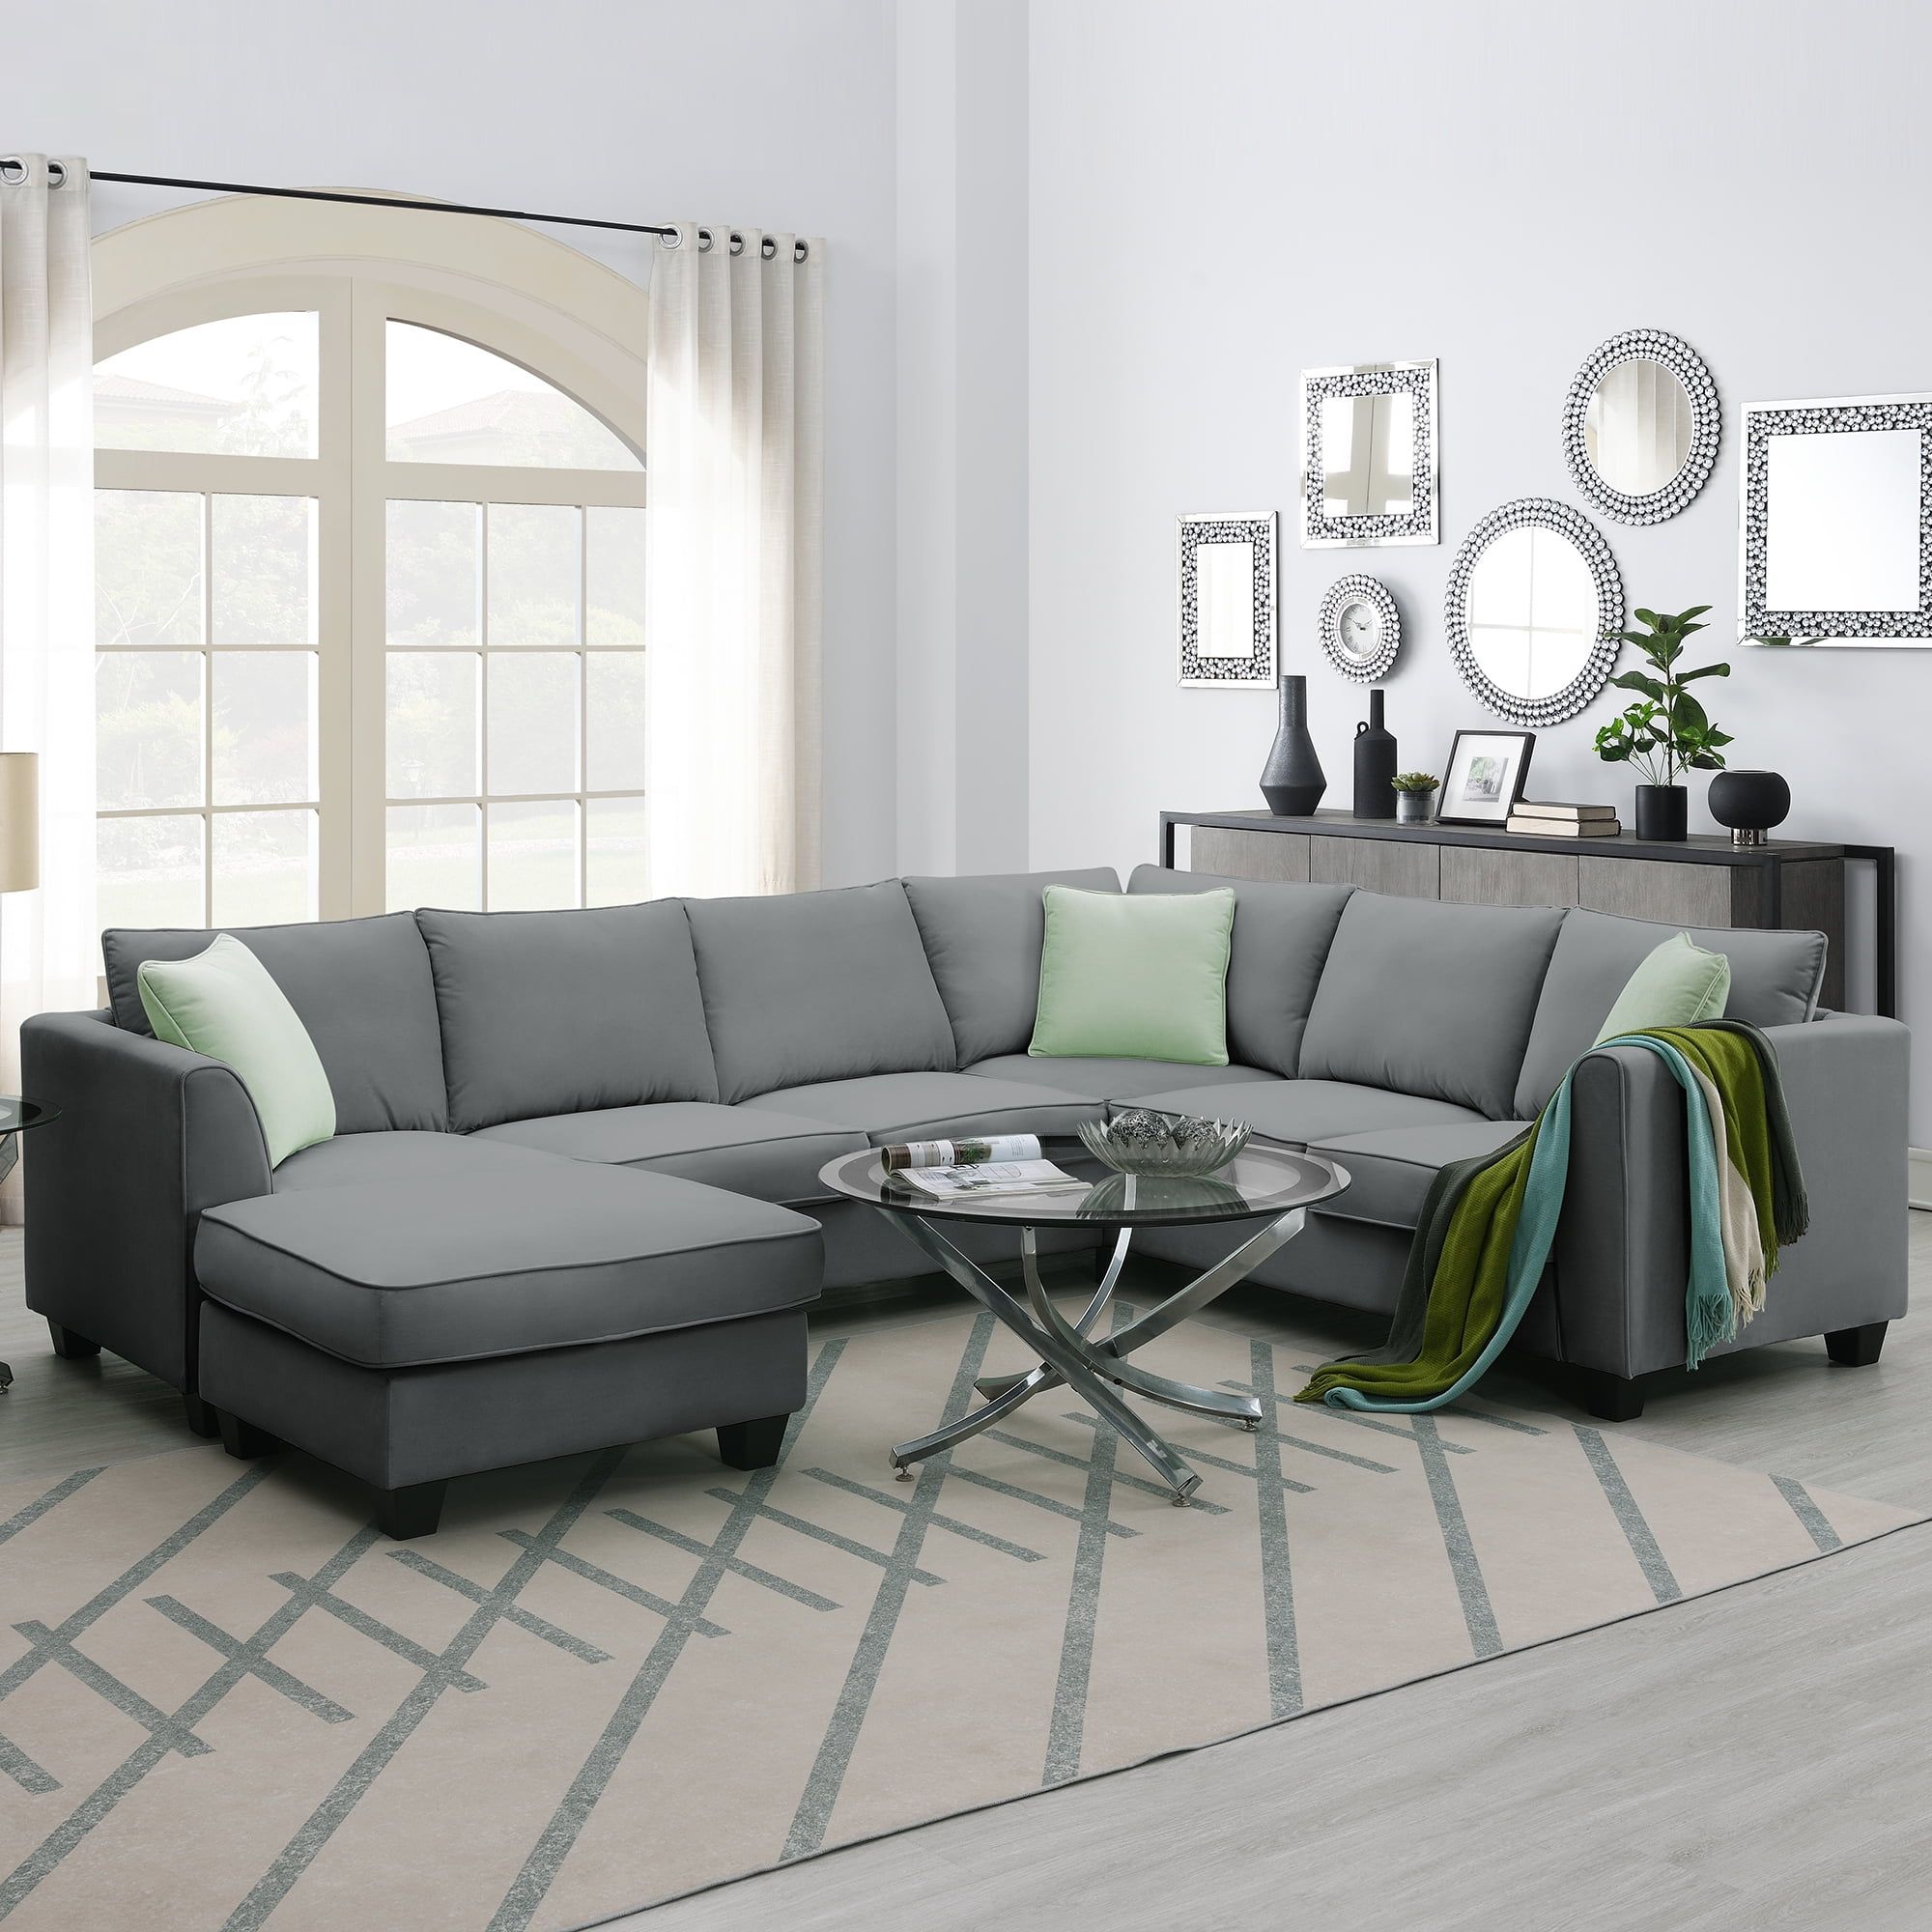 7 Seats Modular Sectional Sofa With Ottoman, L Shape Fabric Sofa Corner  Couch Set Living Room Couches Sets With 3 Pillows, Gray, 112" X 87" –  Walmart Throughout Microfiber Sectional Corner Sofas (Photo 4 of 15)